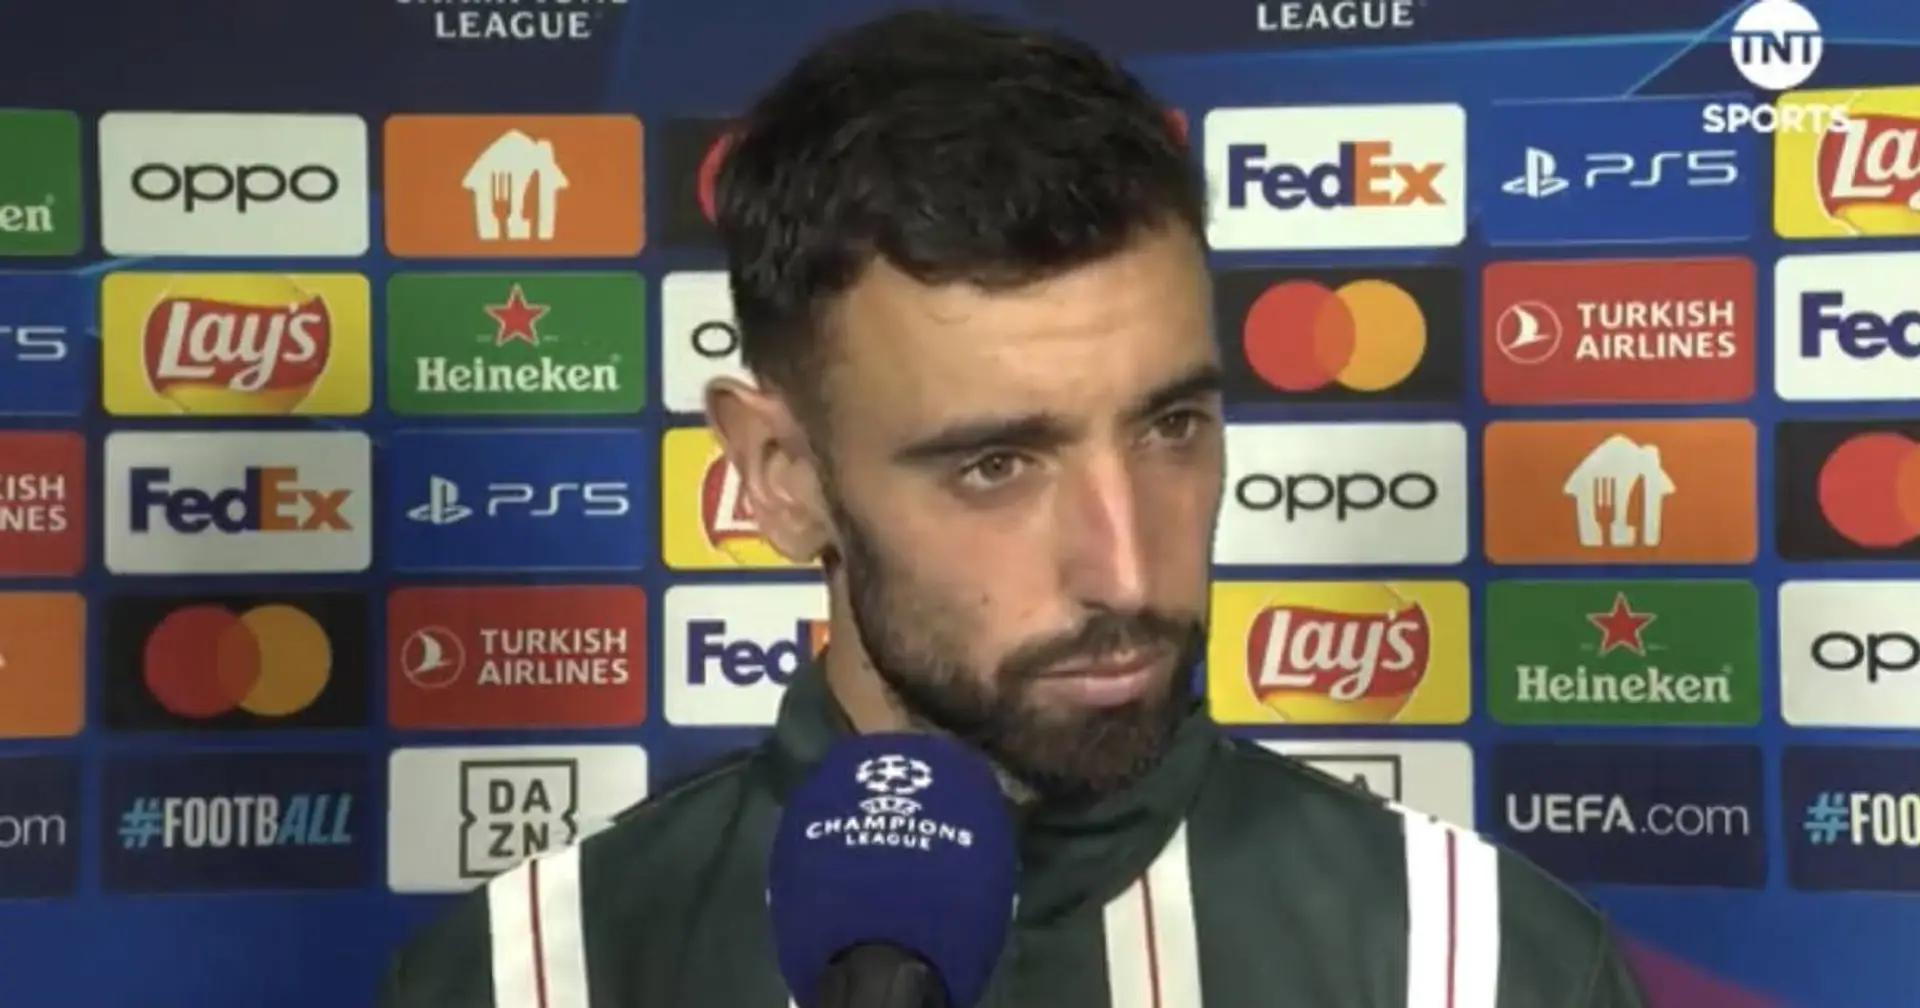 'You know how tough they are': Bruno Fernandes discusses Man United tactics in Bayern Munich loss